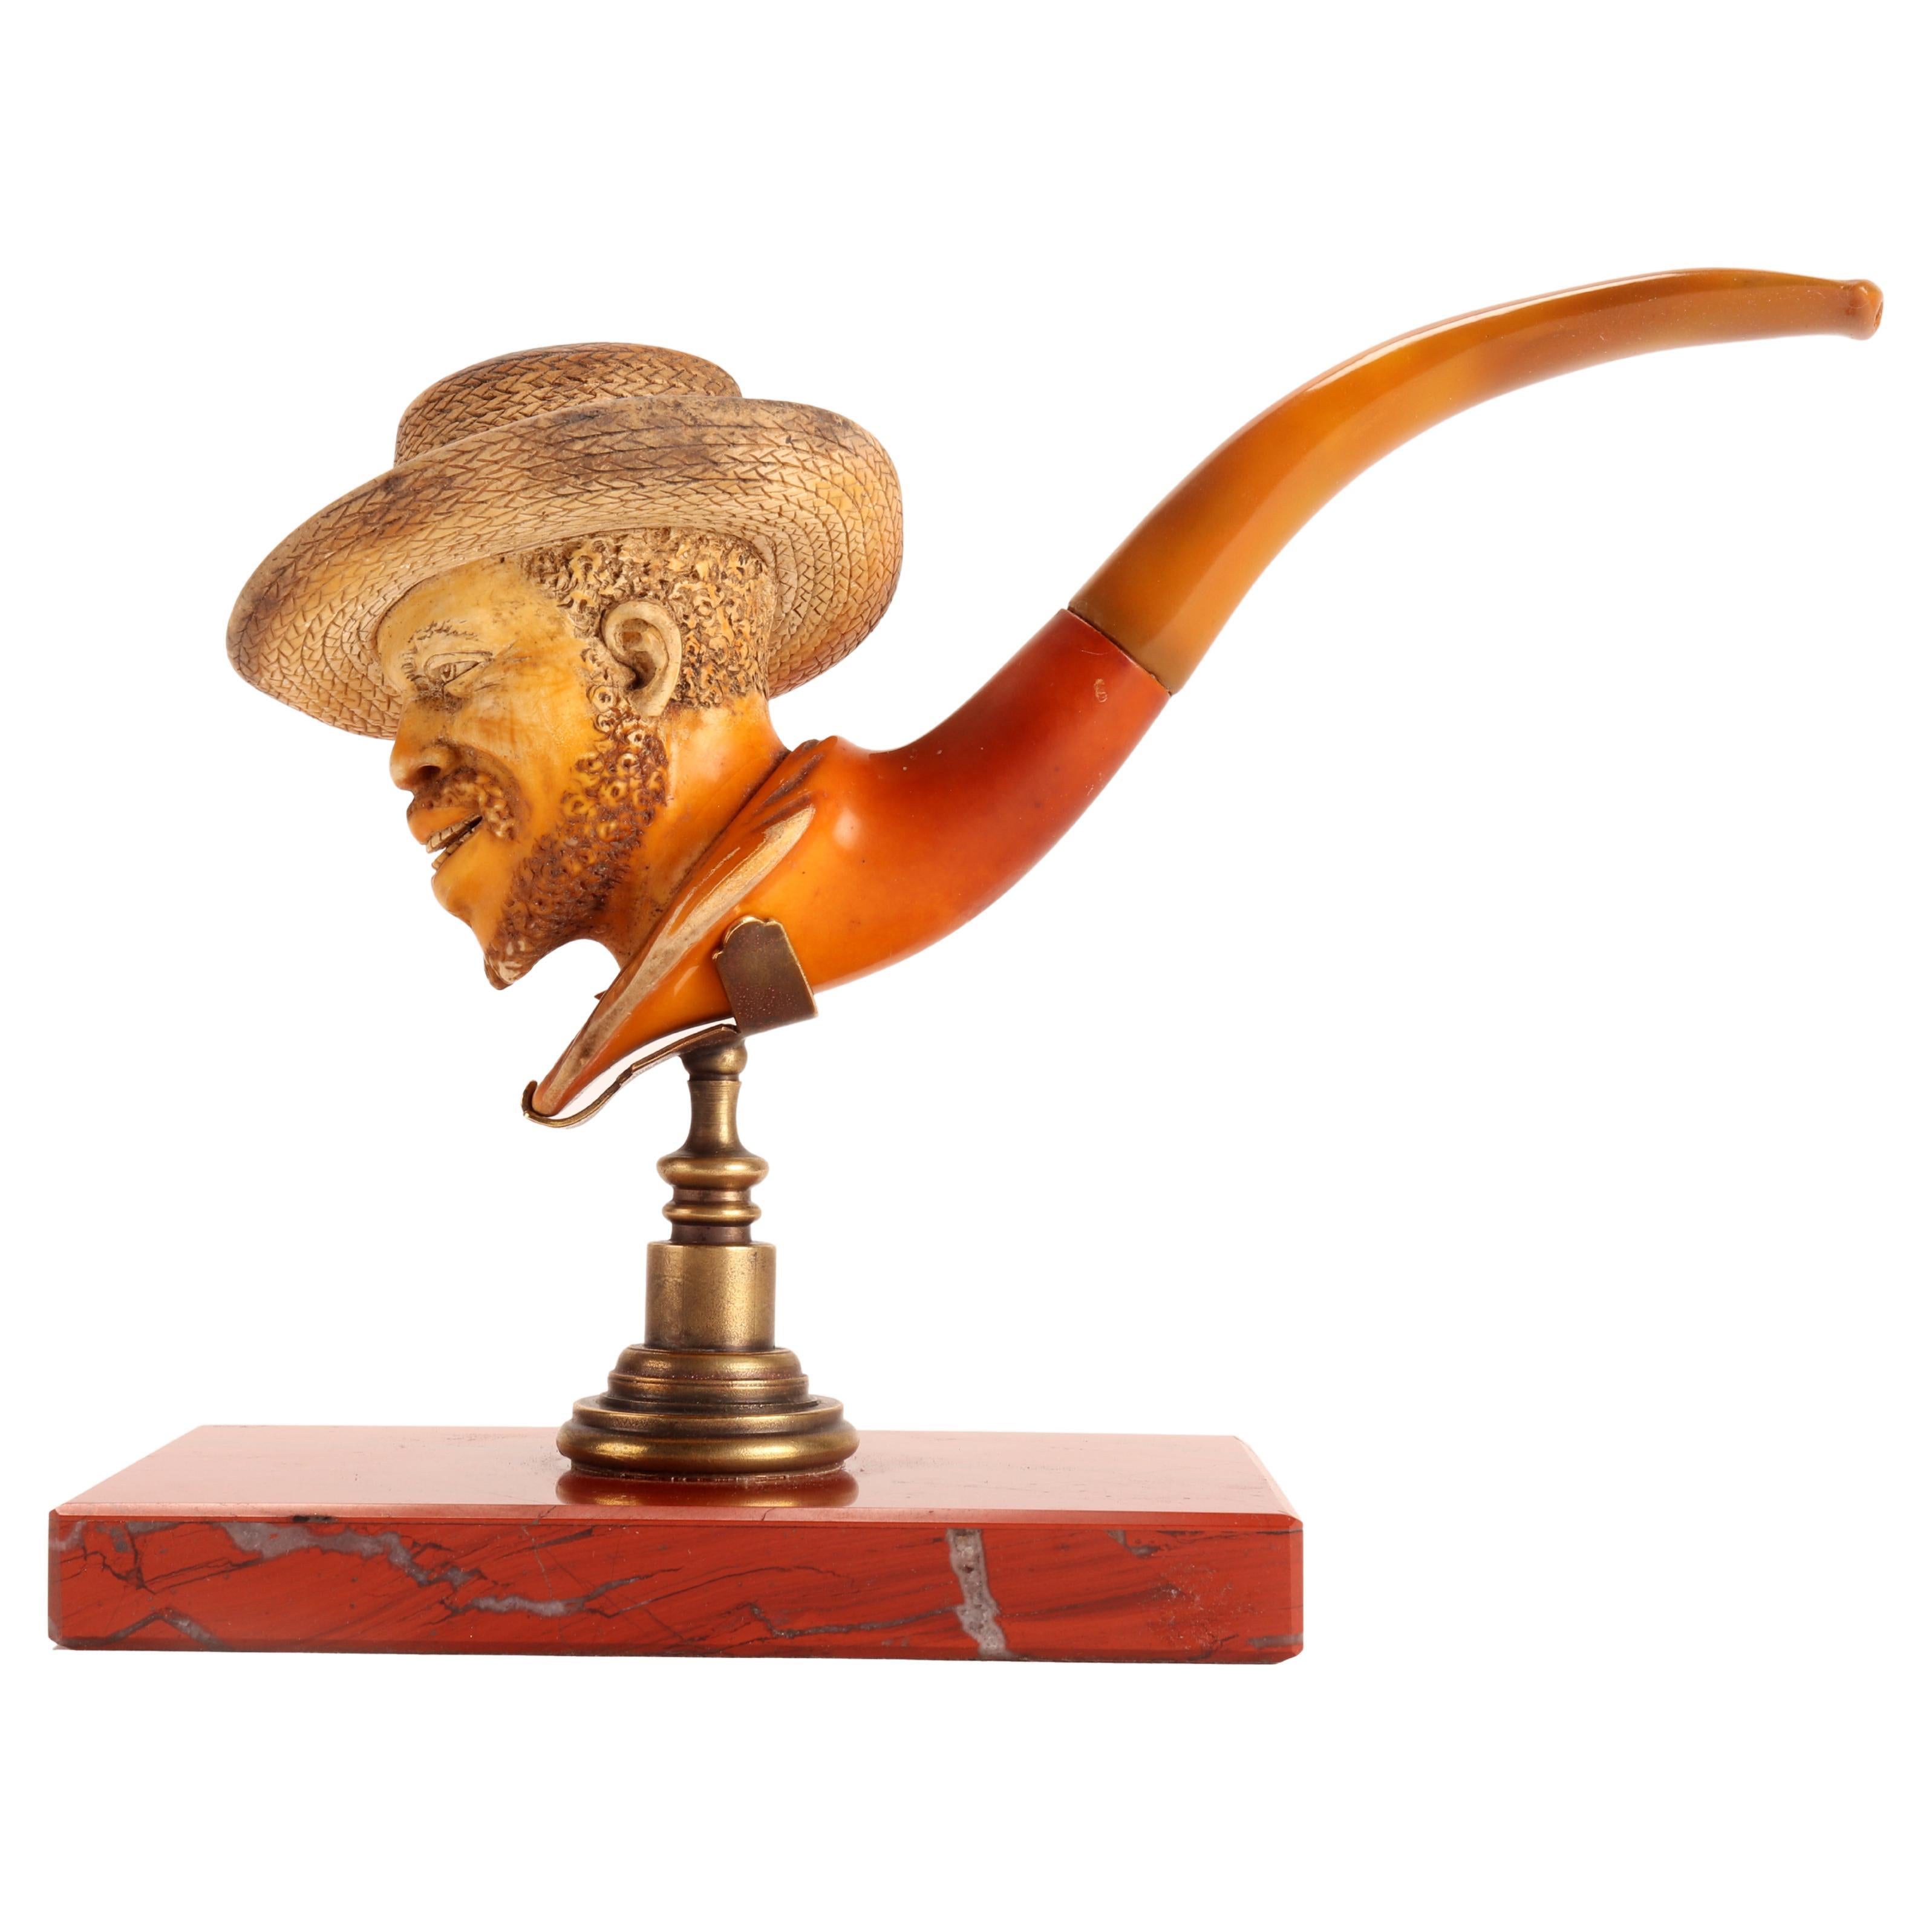 Big Meershaum Pipe Depicting a Man’s Head with a Hat, Vienna 1880